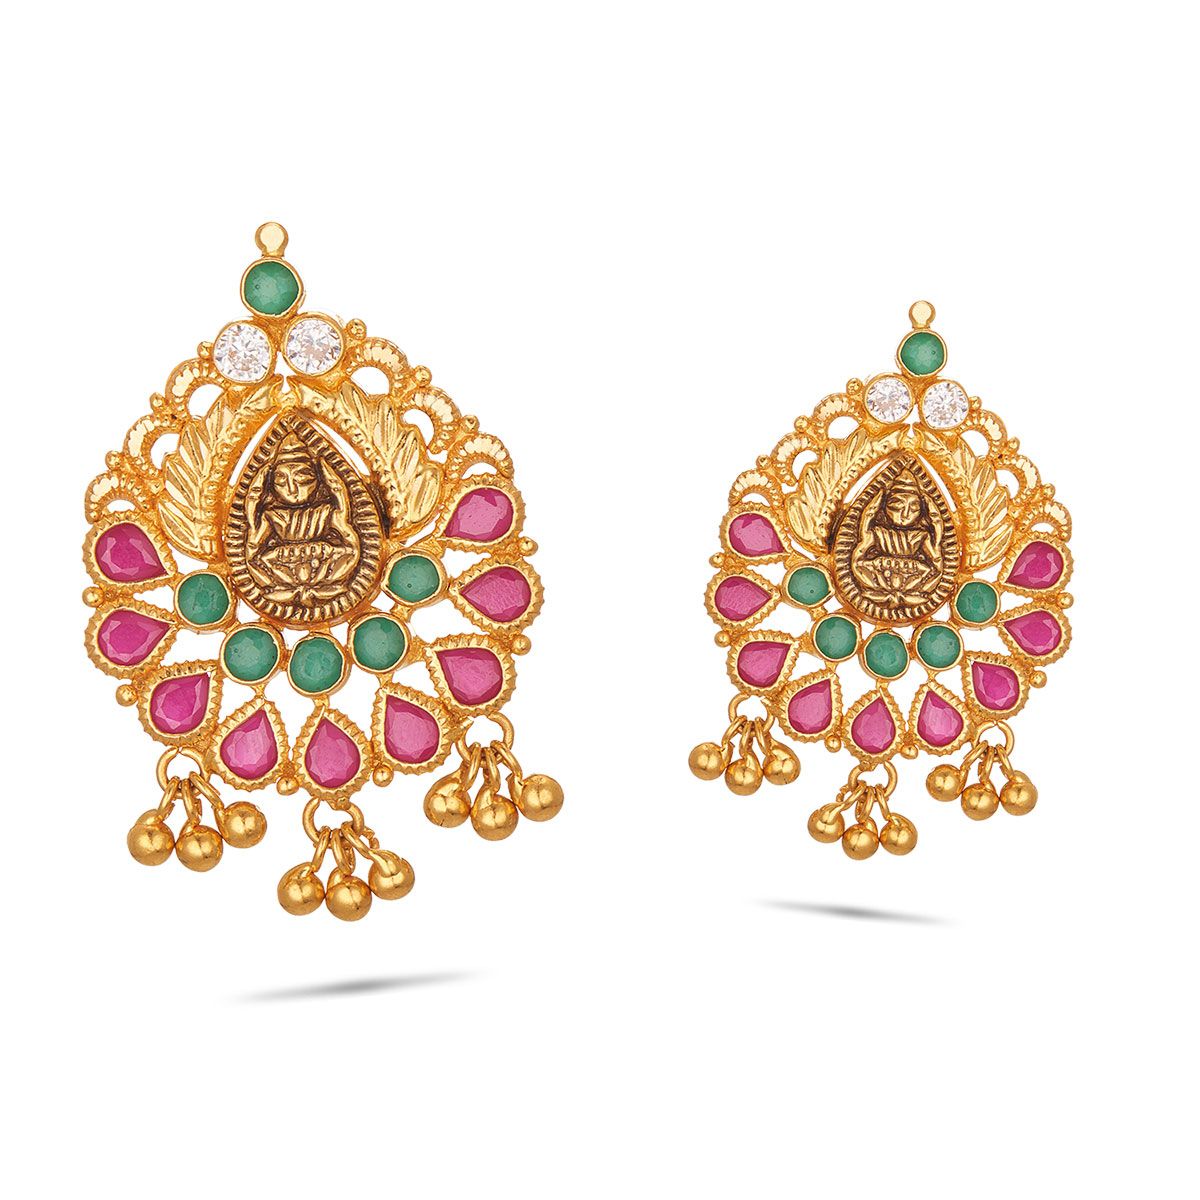 Beautiful Trendy Dual Sided Temple Gold Design Earring Jhumka Buy Online At  LittleFingers : LittleFingers: Amazon.in: Fashion